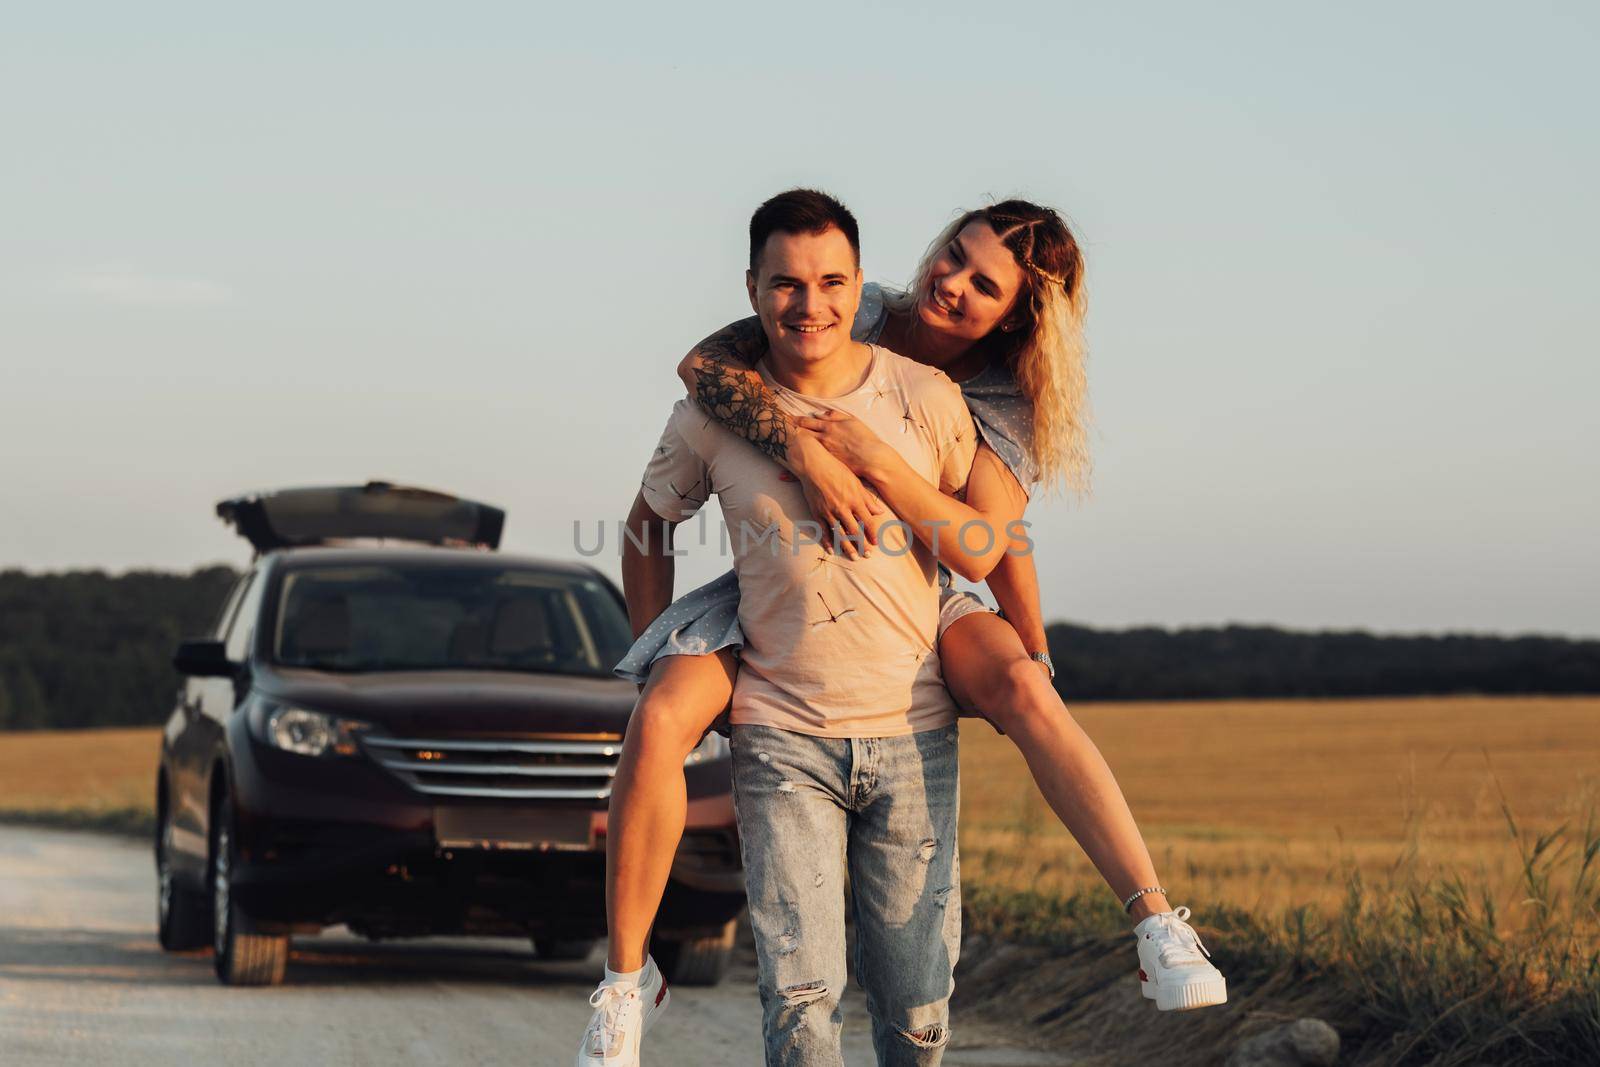 Caucasian Man Carries Girlfriend on His Back on Background of Their SUV Car, Young Couple Enjoying Their Road Trip at Sunset